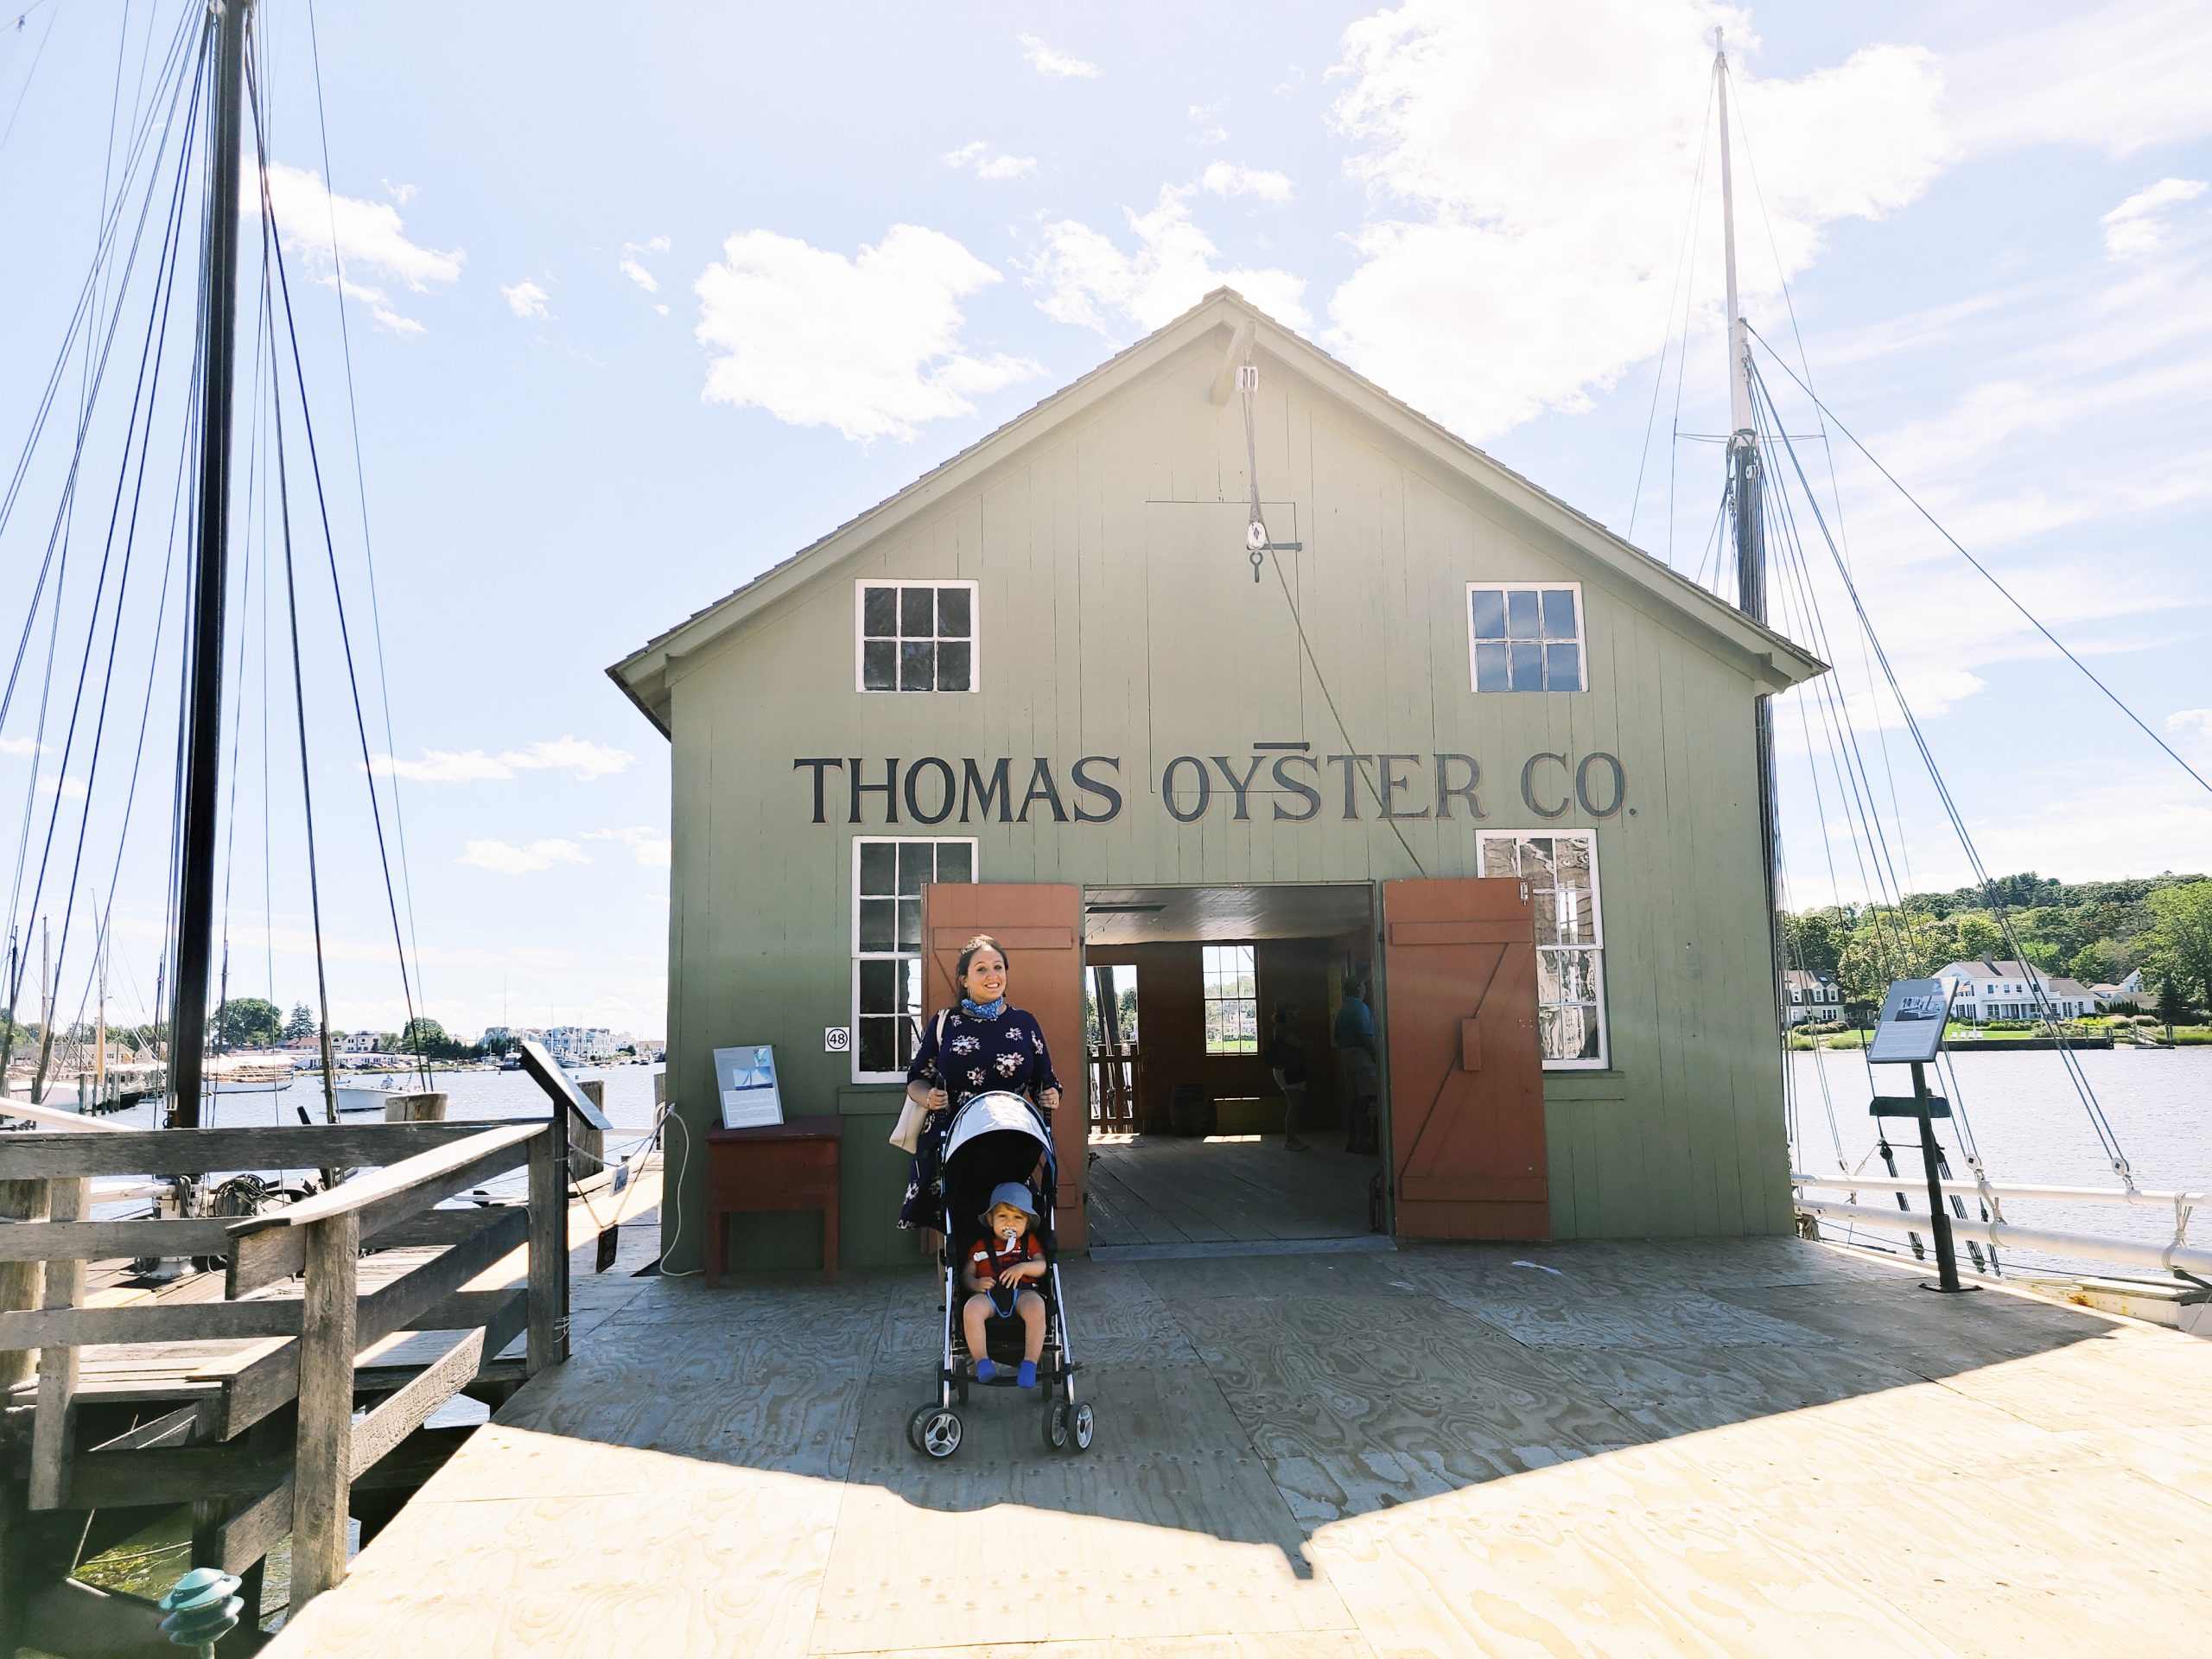 A woman and a child in a stroller stand in front of a building labelled "Thomas Oyster Co."